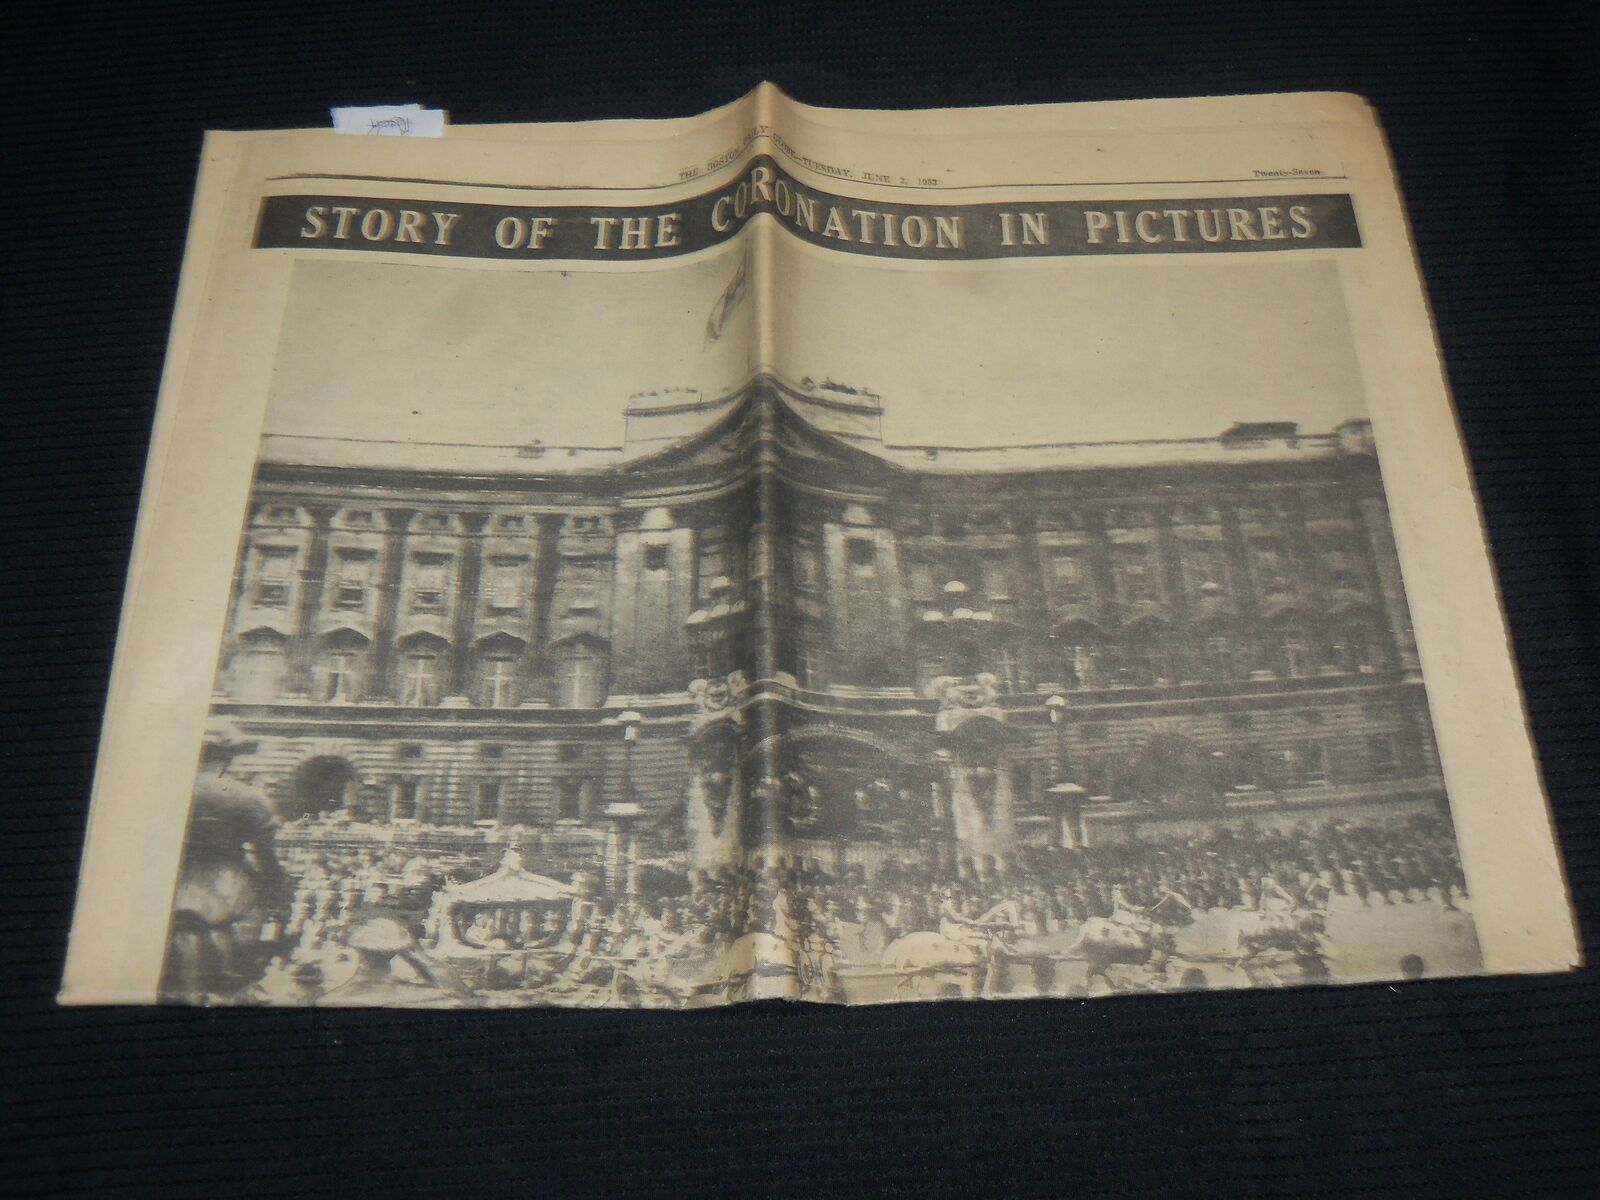 1953 JUNE 2 BOSTON GLOBE NEWSPAPER - CORONATION IN PICTURES SECTION - NP 4251L